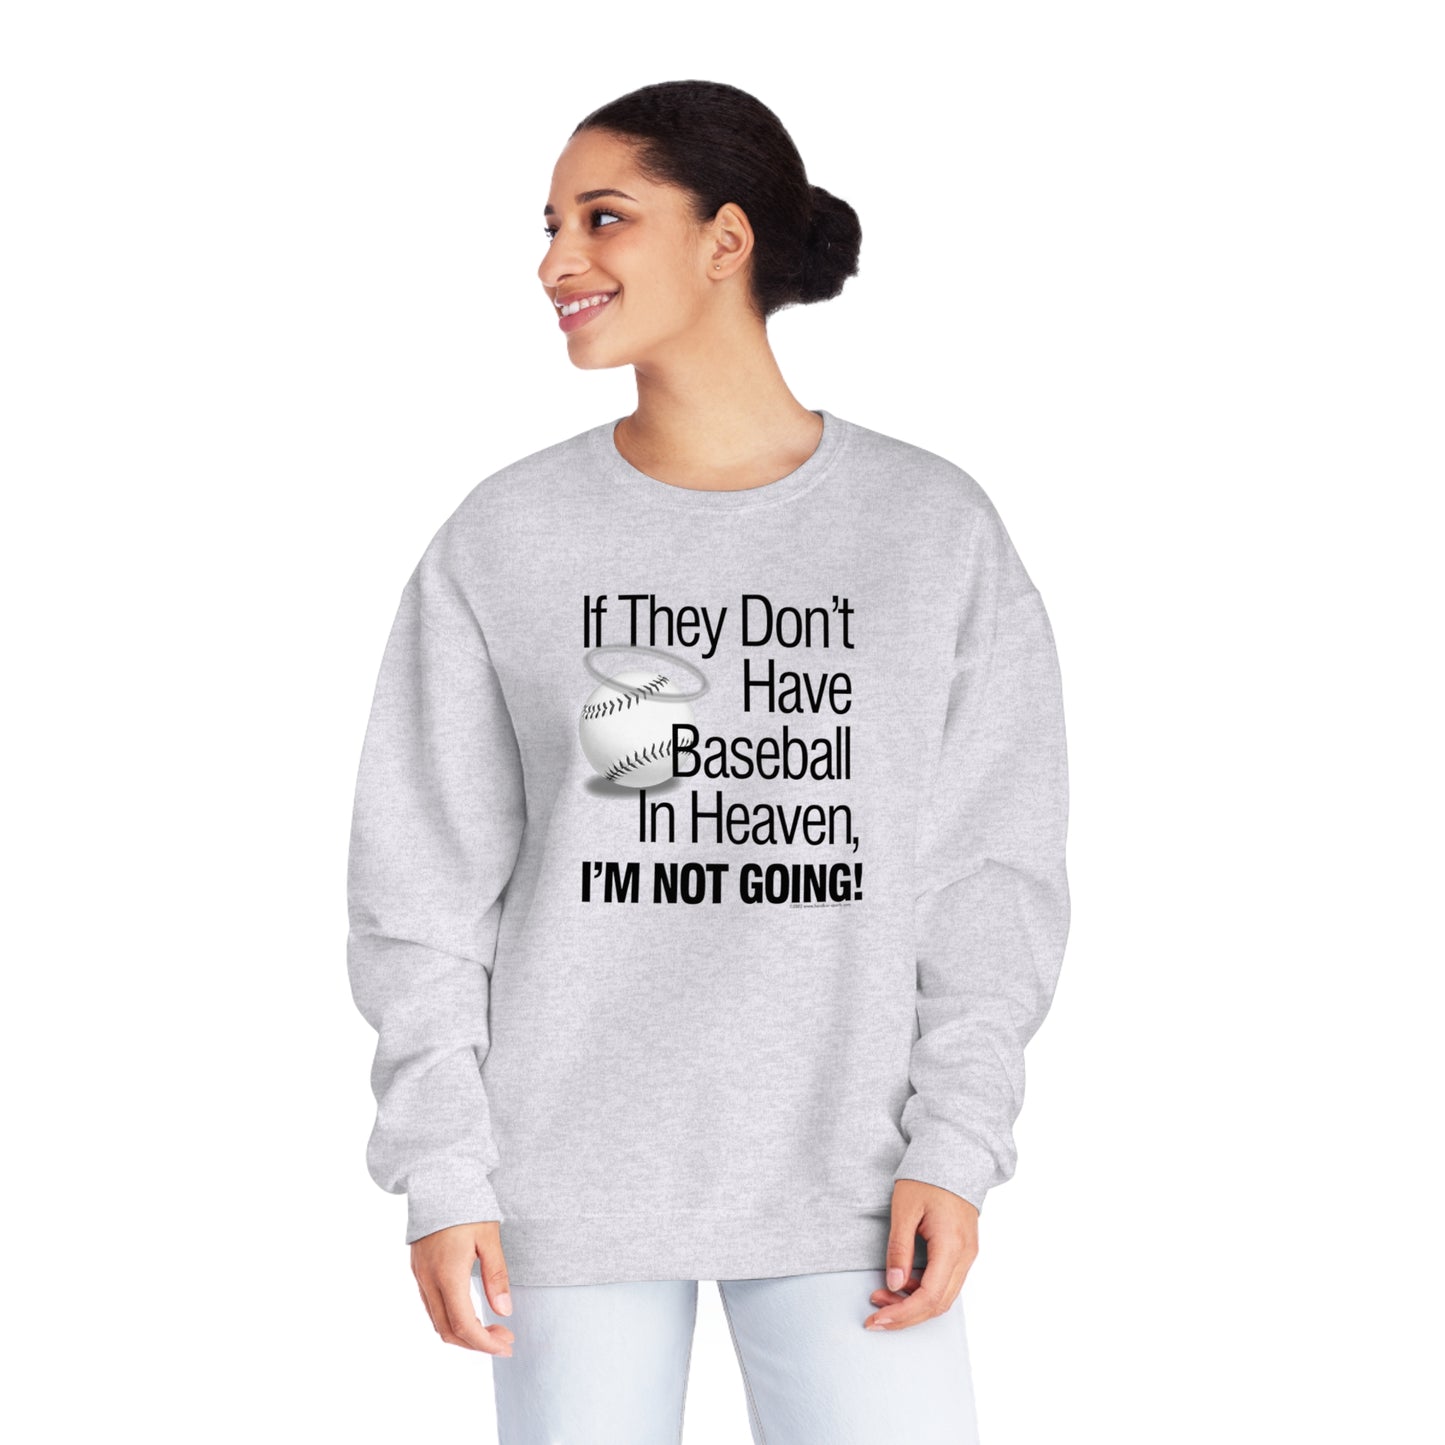 If they Don't Have Baseball in Heaven I'm Not Going Crewneck Sweatshirt, Funny Baseball Crew sweatshirt, baseball humor, love baseball